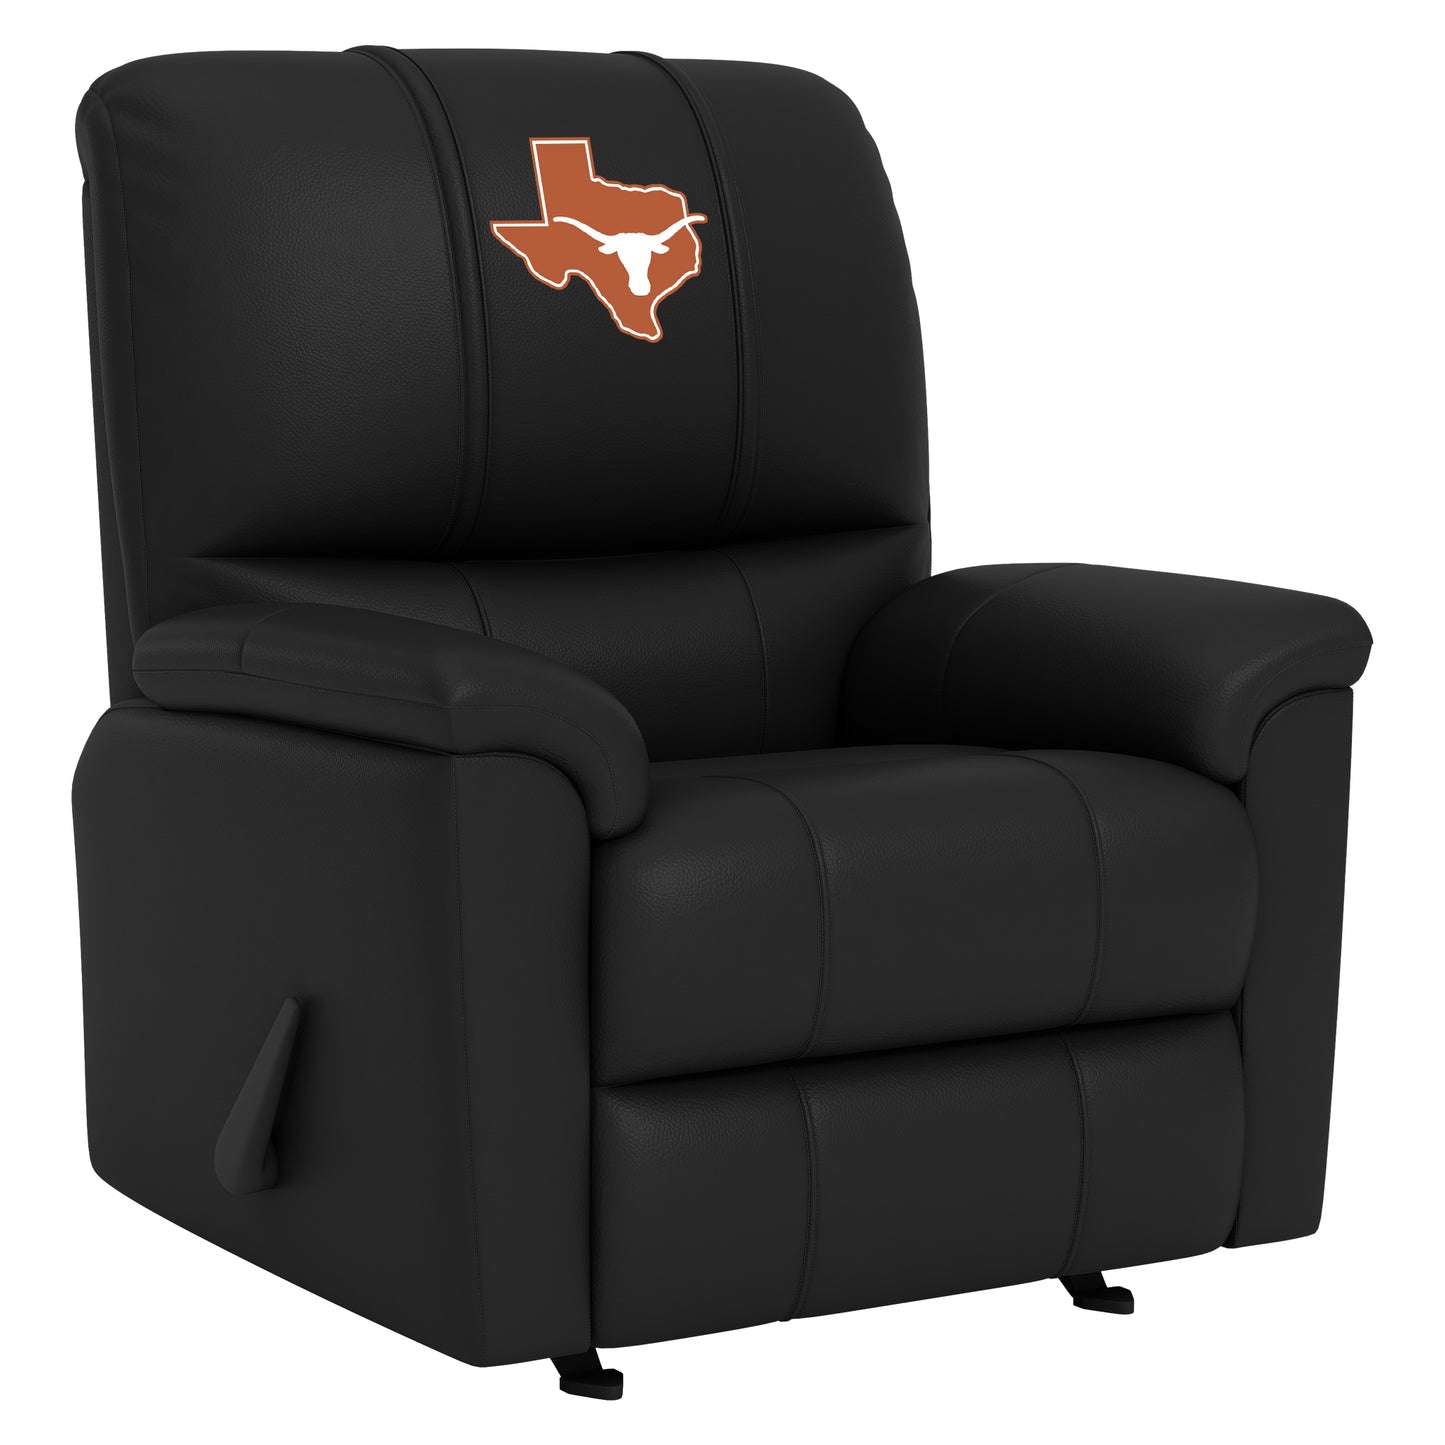 Freedom Rocker Recliner with Texas Longhorns Secondary